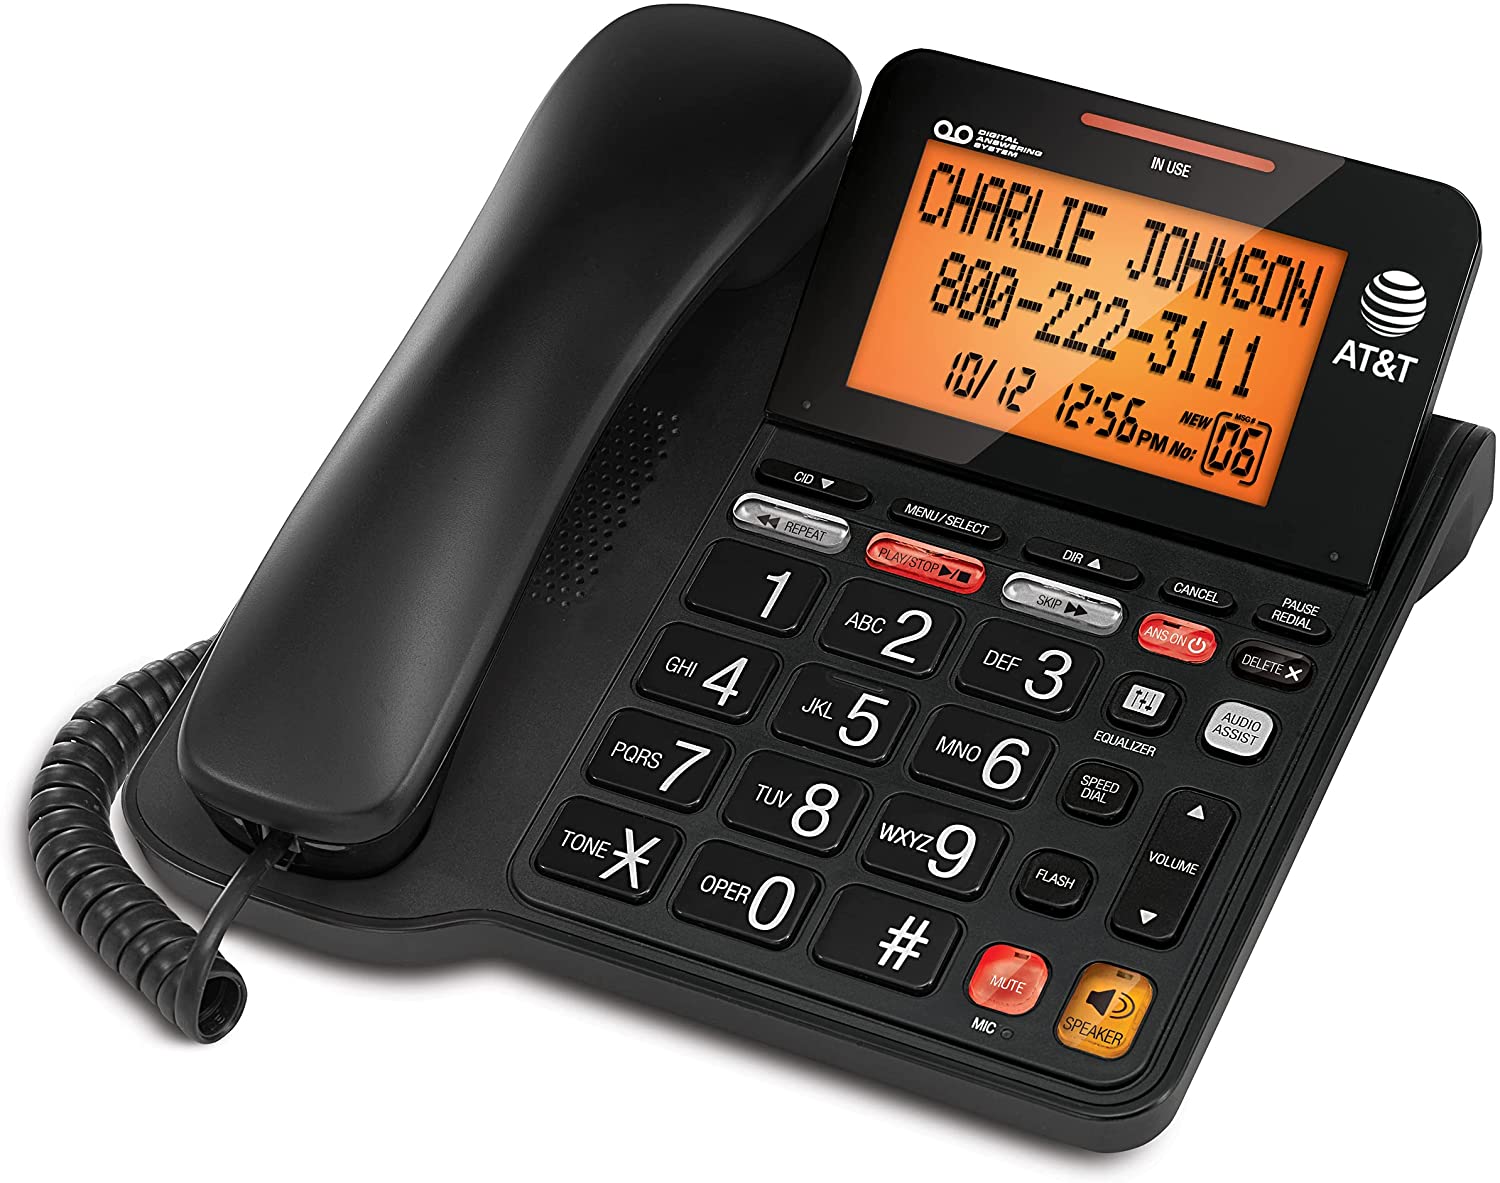 ATT CL4940 Corded Phone with Answering System and Backlit Tilt Display,  Black (New)